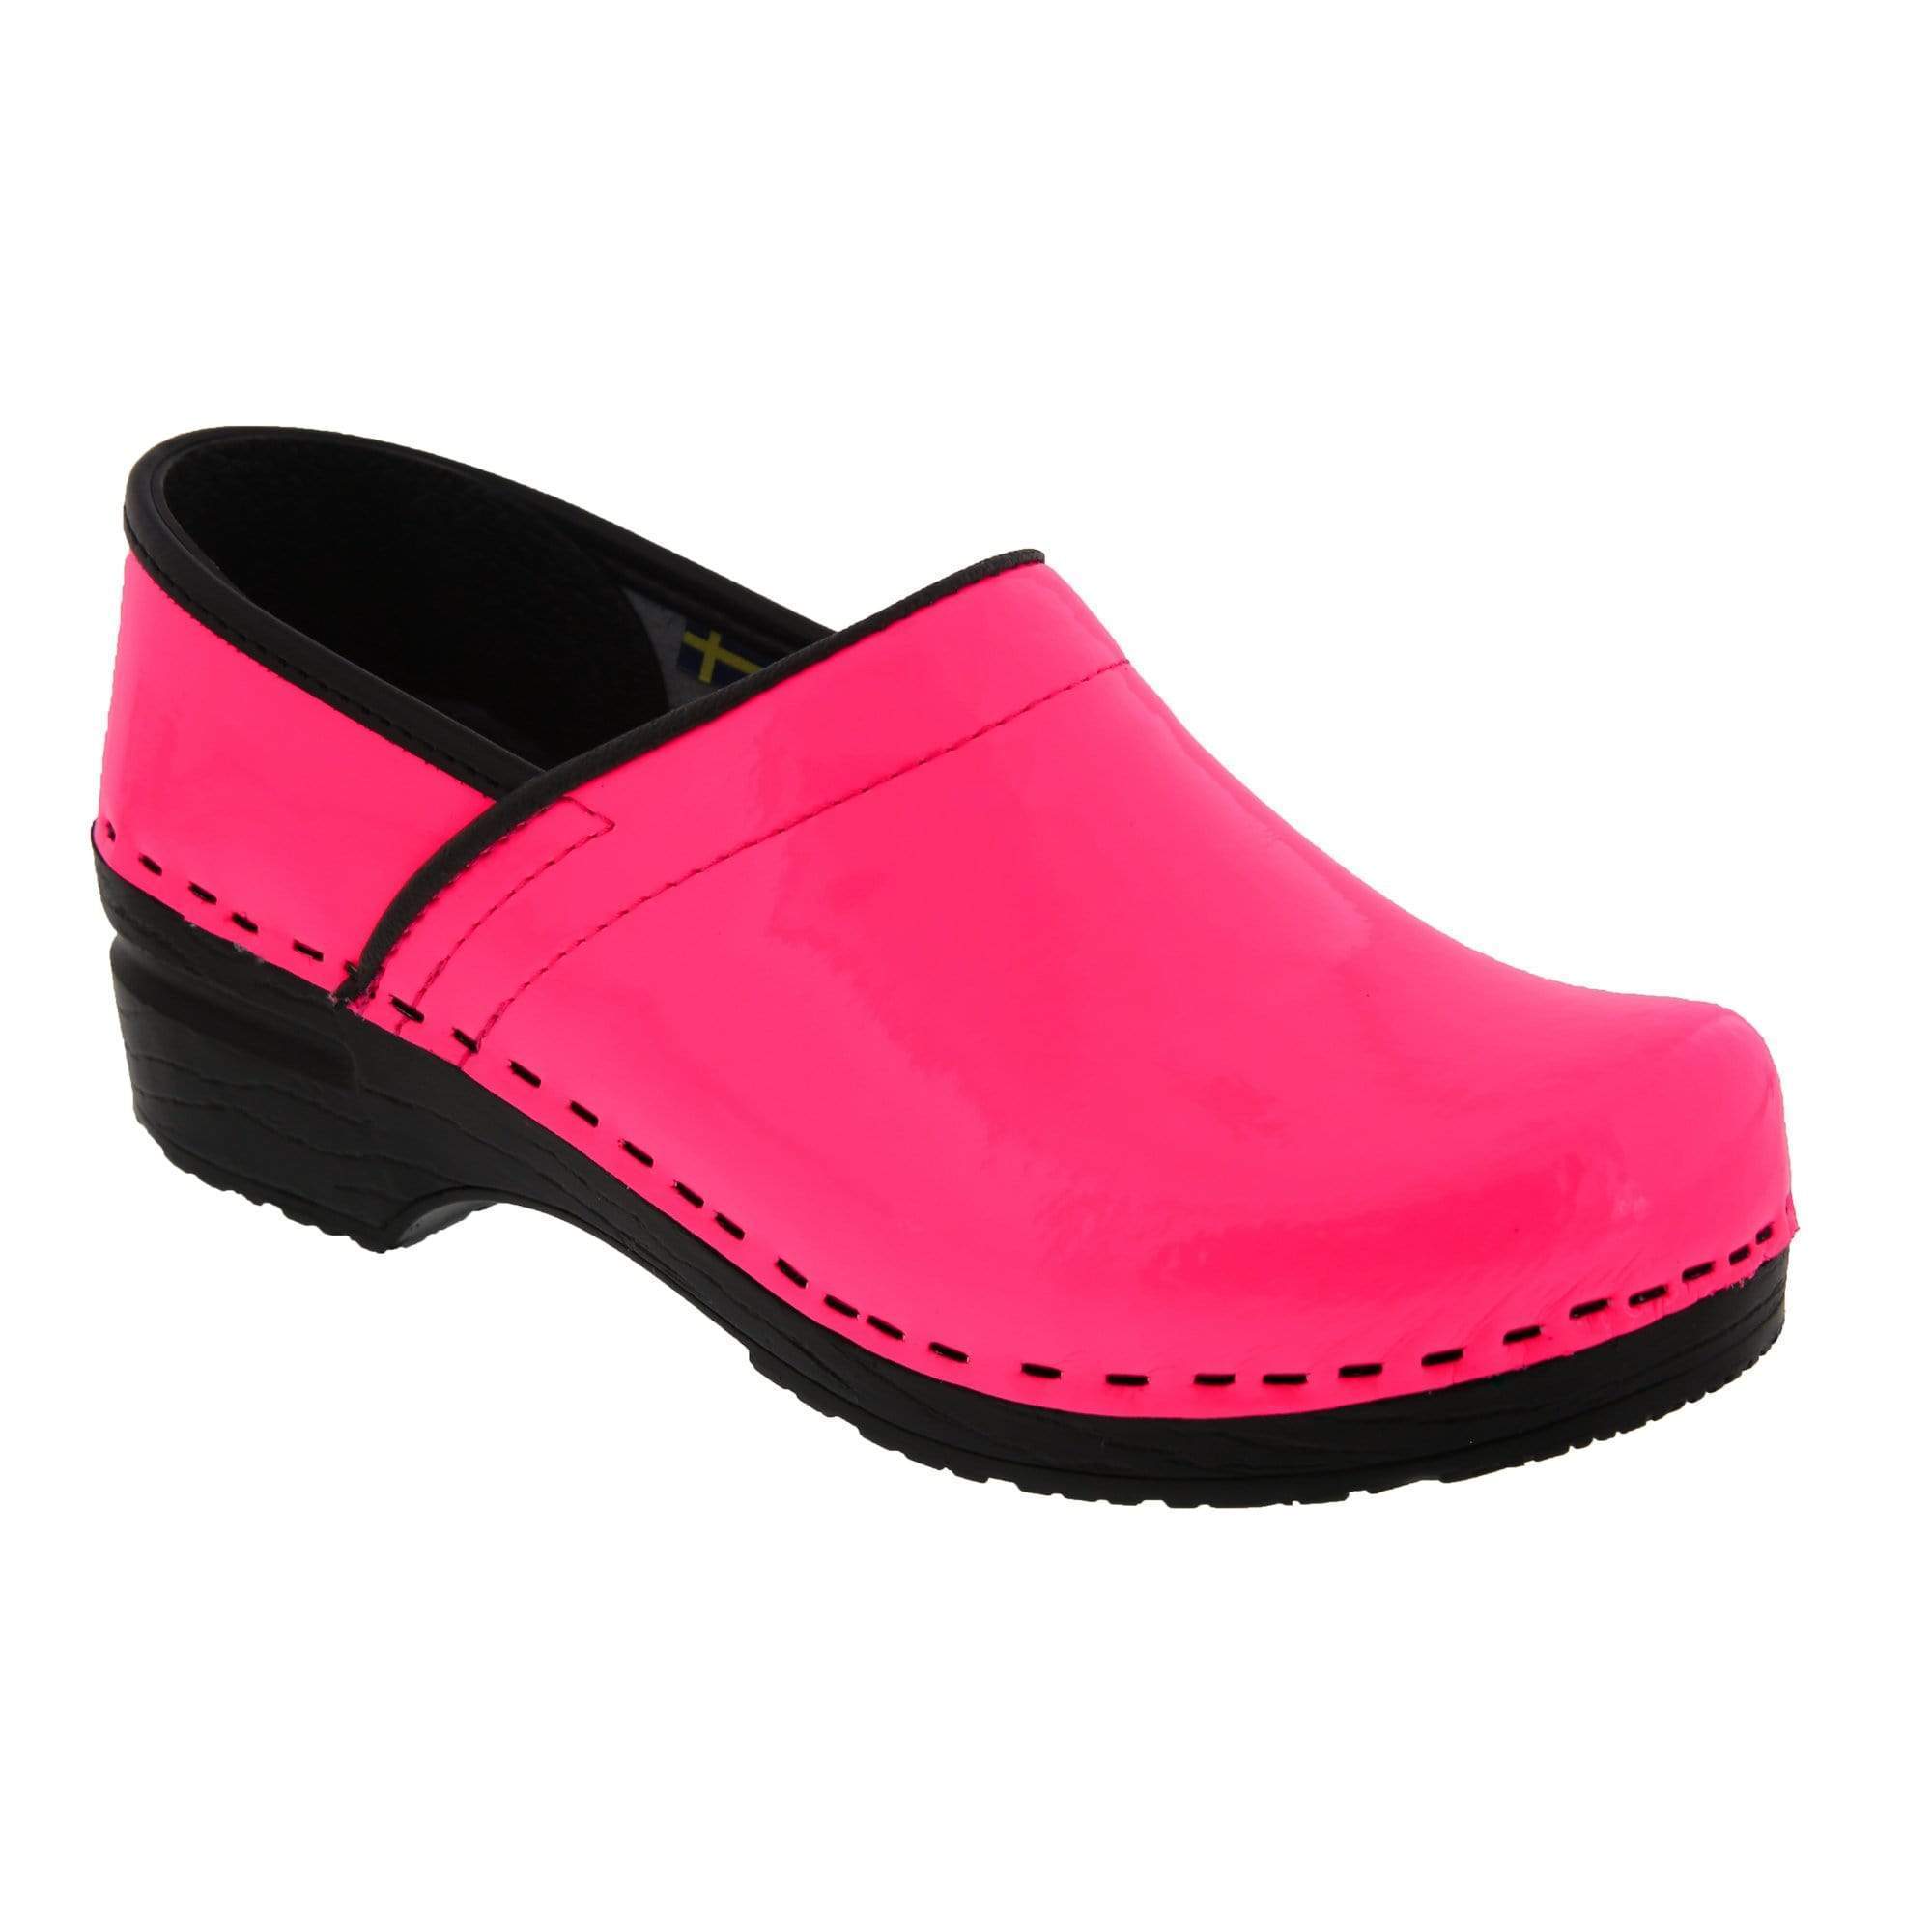 Electric Pink Fuzzy Bling Clogs Rhinestone Clogs Womens -  Israel